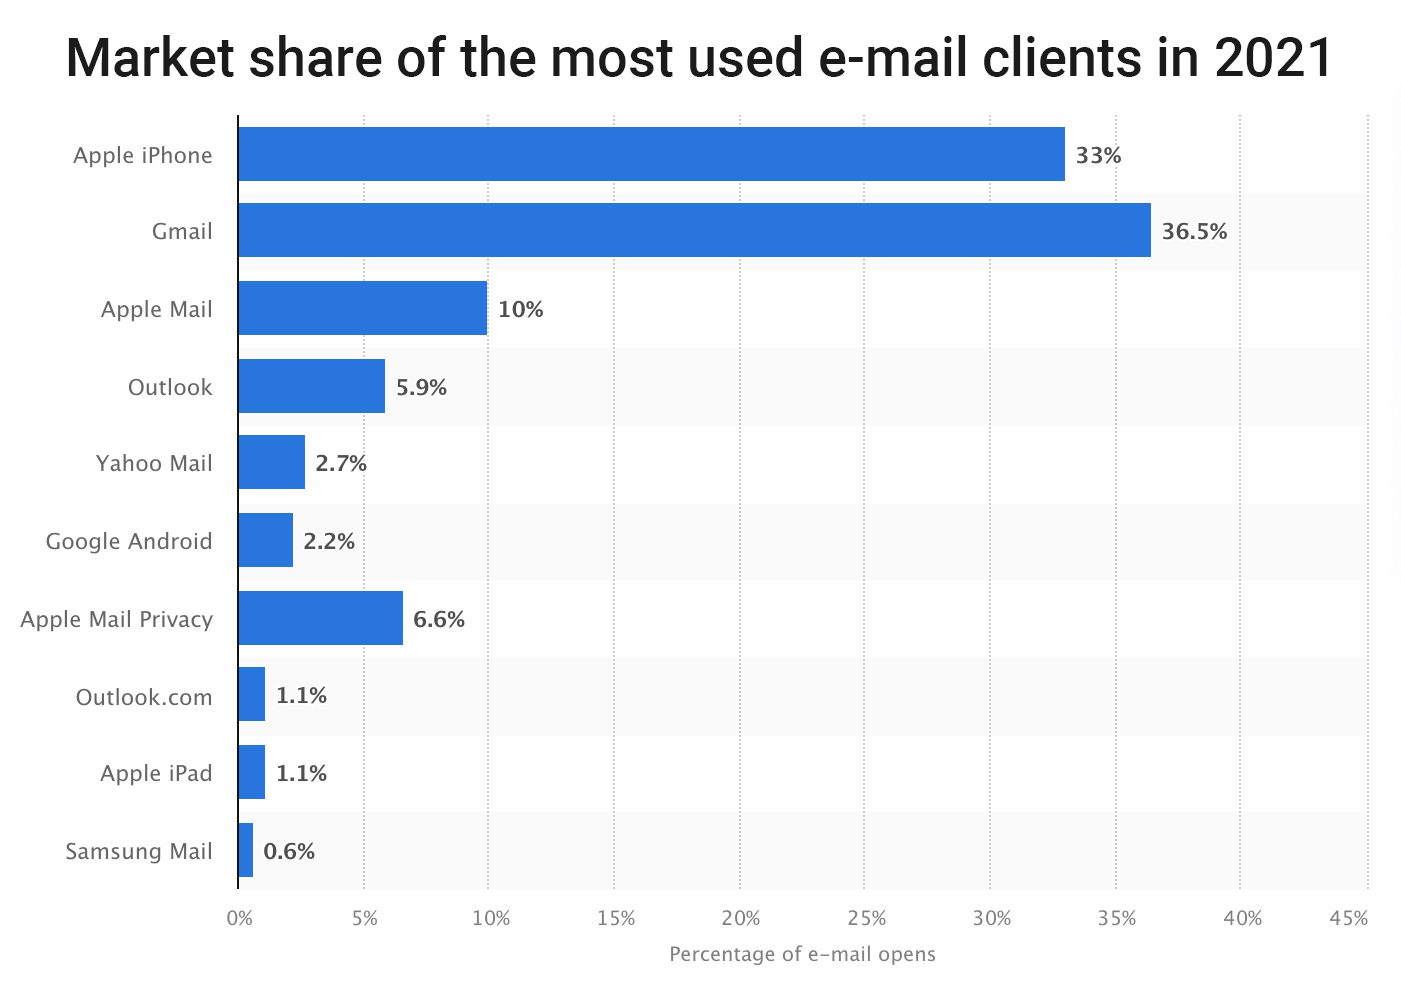 Market share of the most used e-mail clients in 2021